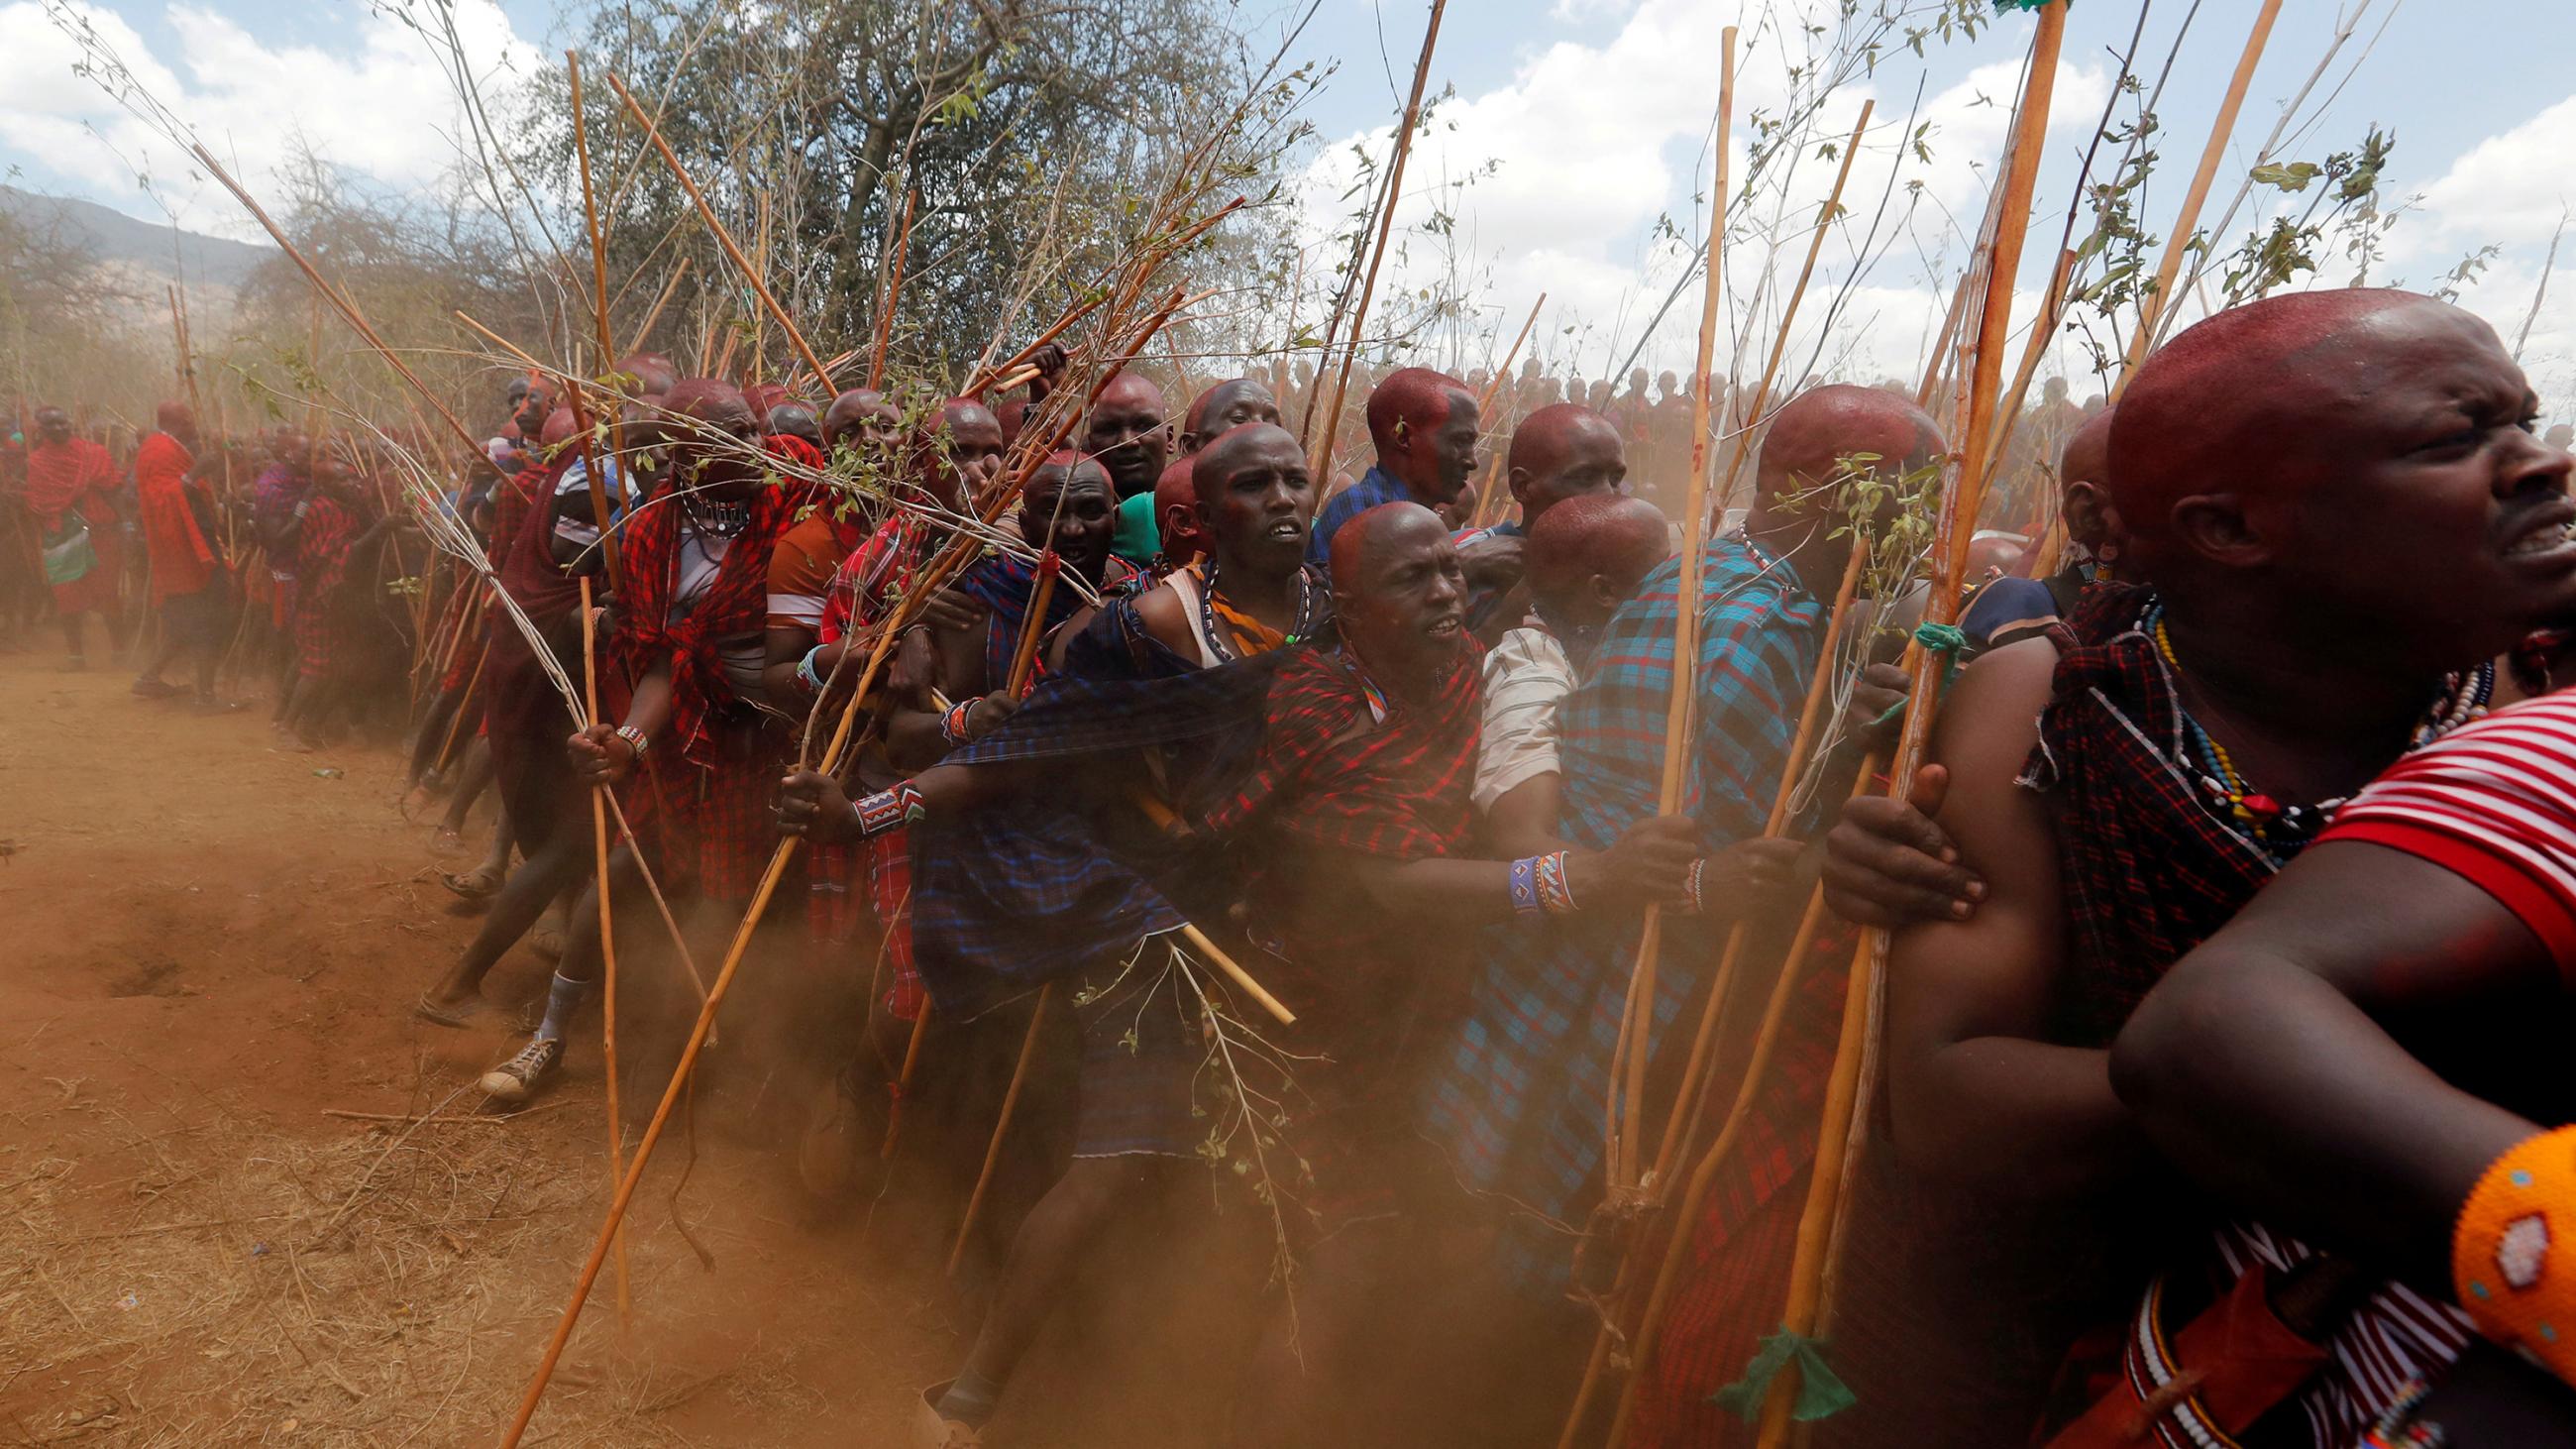 The photo shows a rite of passage ceremony with a crowd of young and old men holding sticks and kicking up a lot of dust. 